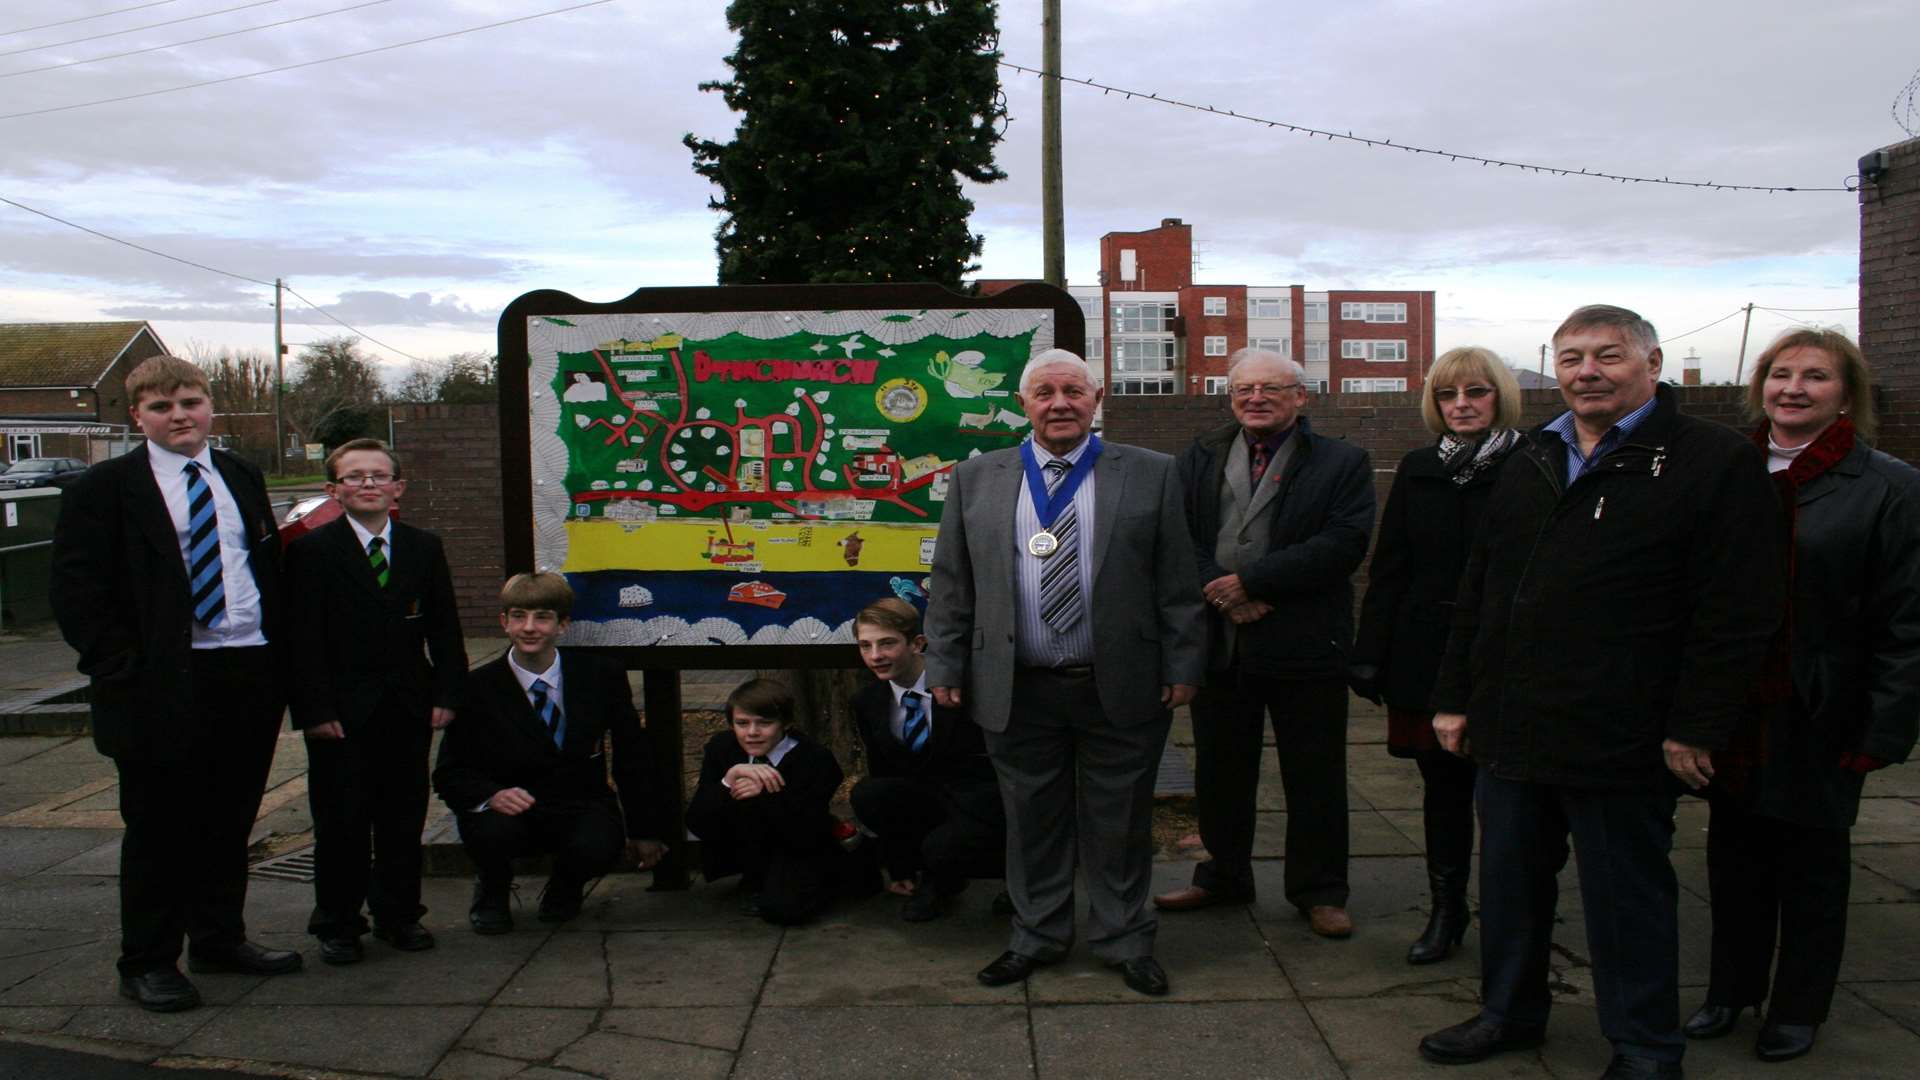 Councillors and Marsh Academy pupils at the unveiling of the Christmas tree and sign.